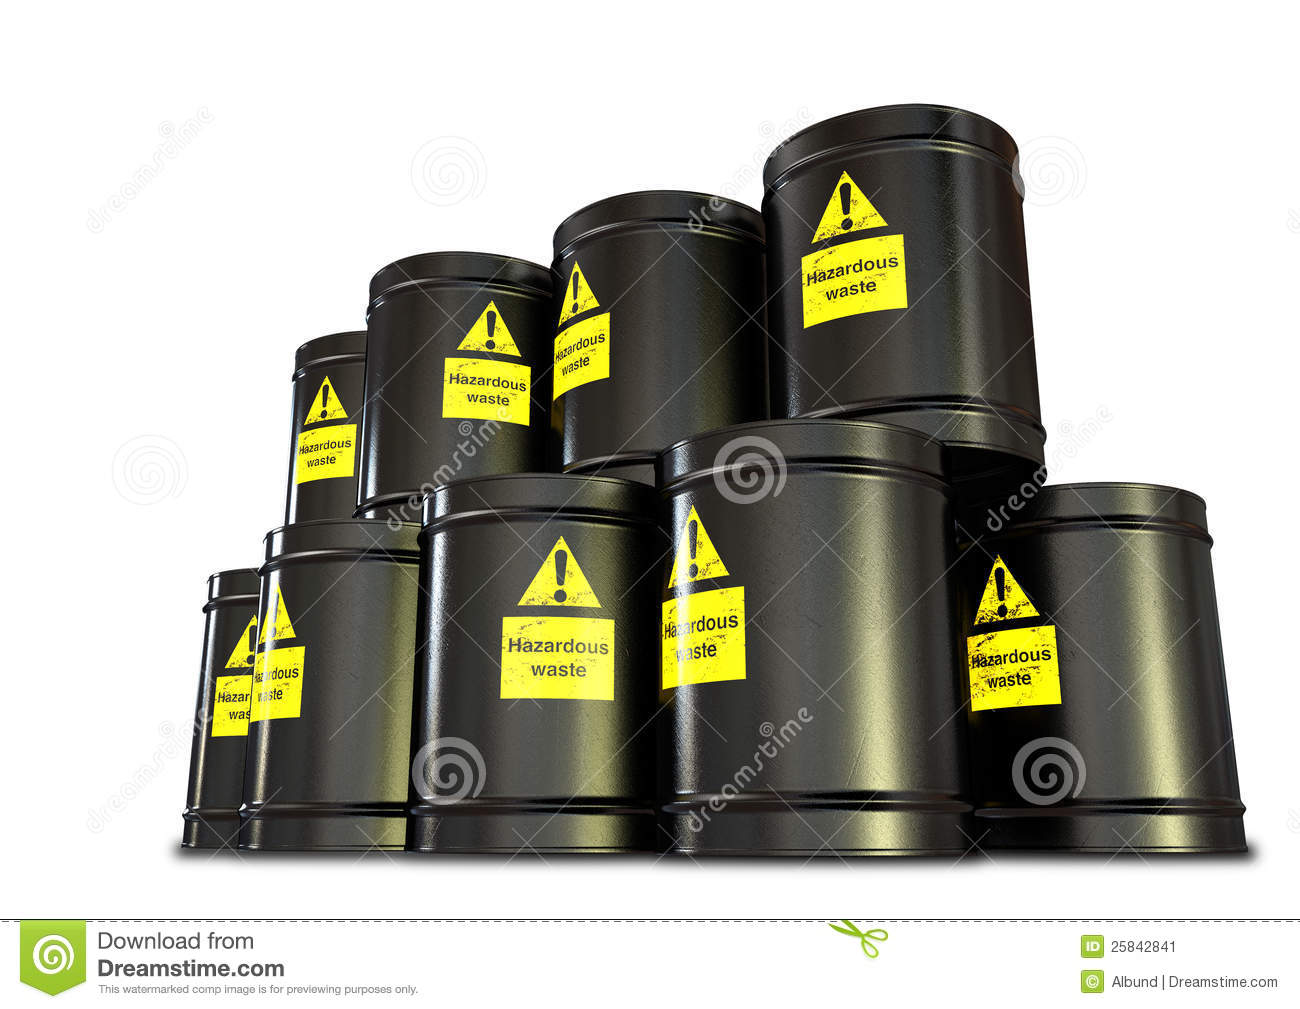 Of Black Metal Barrels With Yellow Hazardous Waste Labels On Each